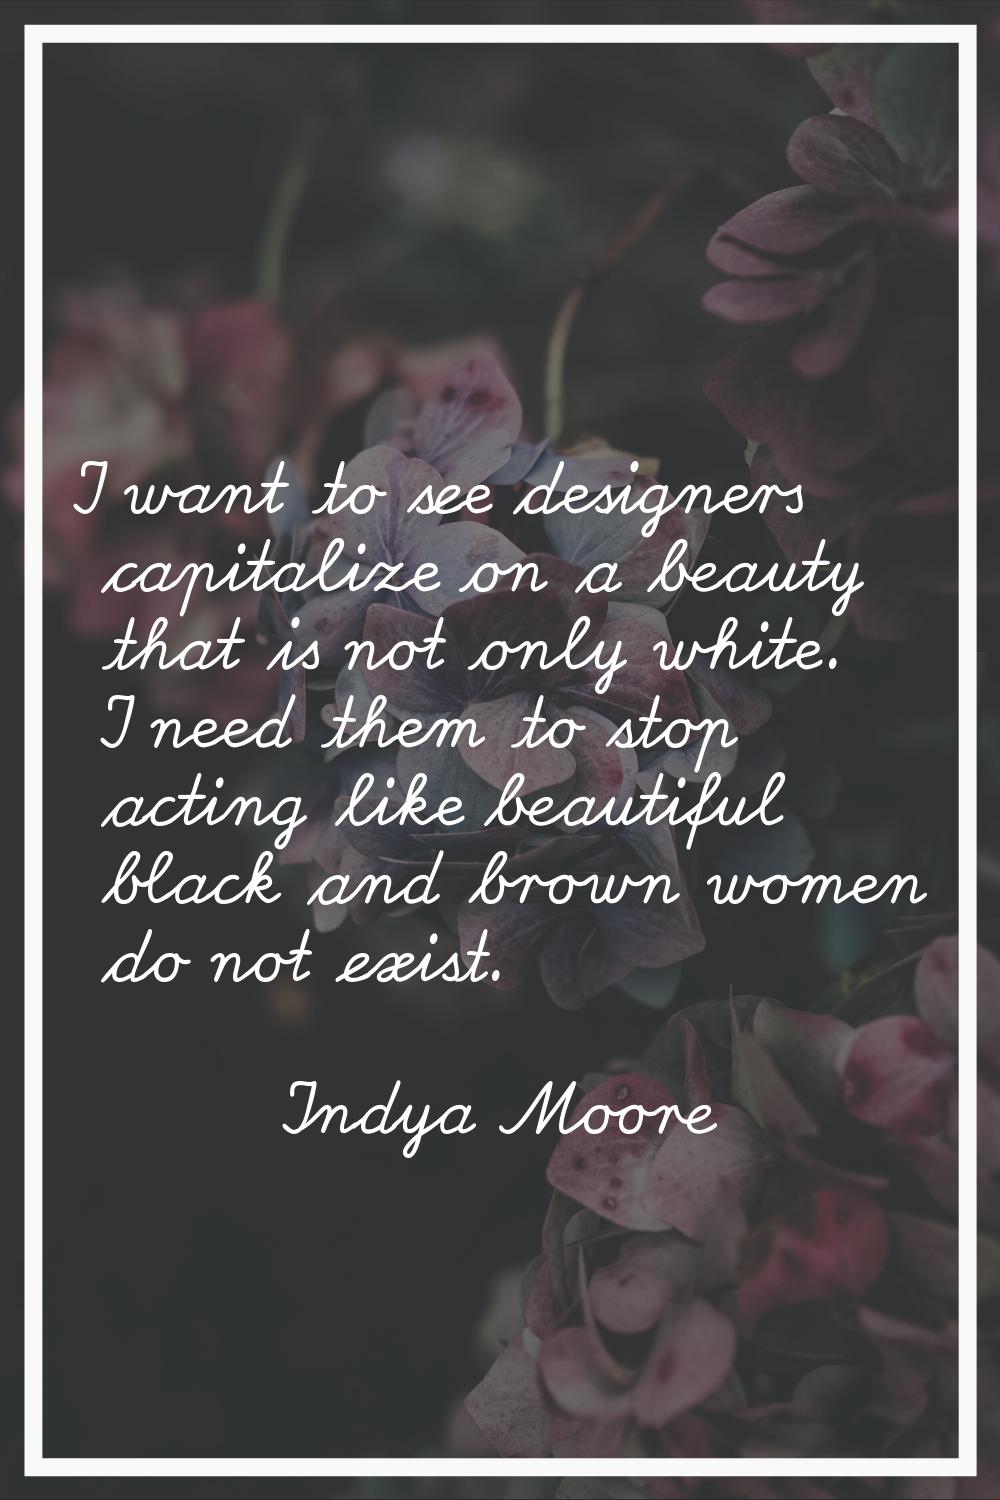 I want to see designers capitalize on a beauty that is not only white. I need them to stop acting l